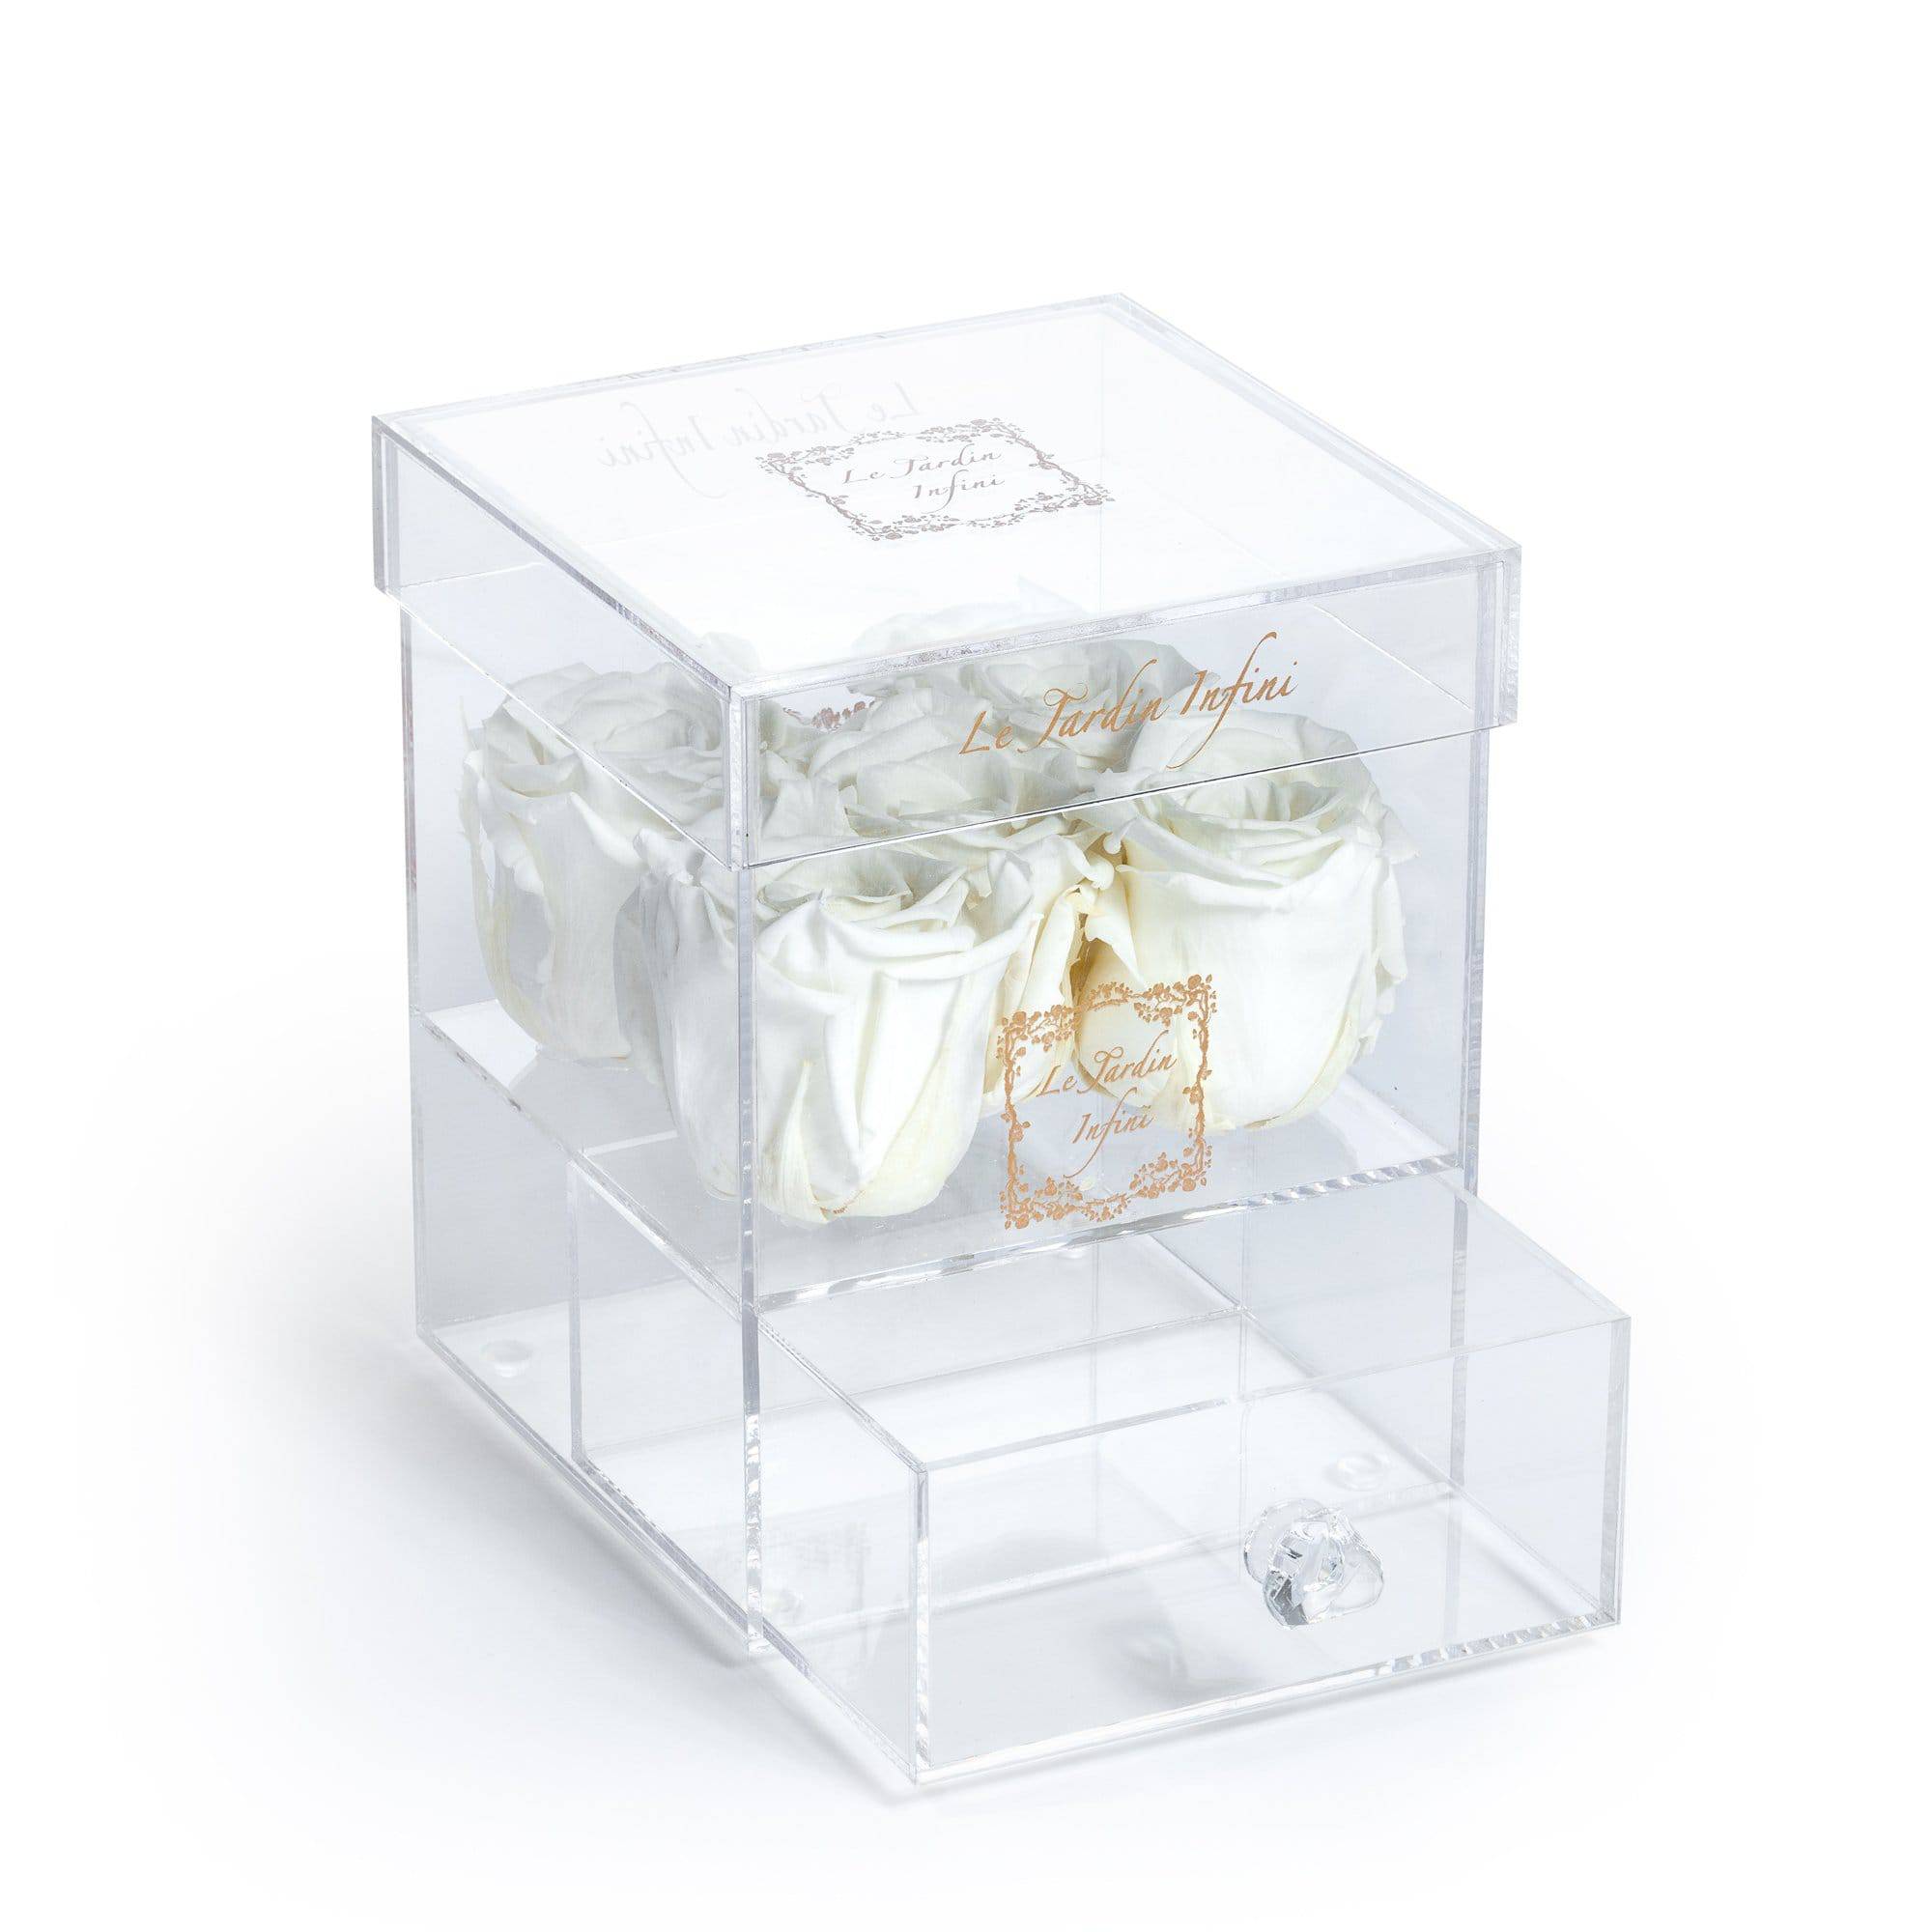 5 White Preserved Roses - Acrylic Box With Drawer - Le Jardin Infini Roses in a Box